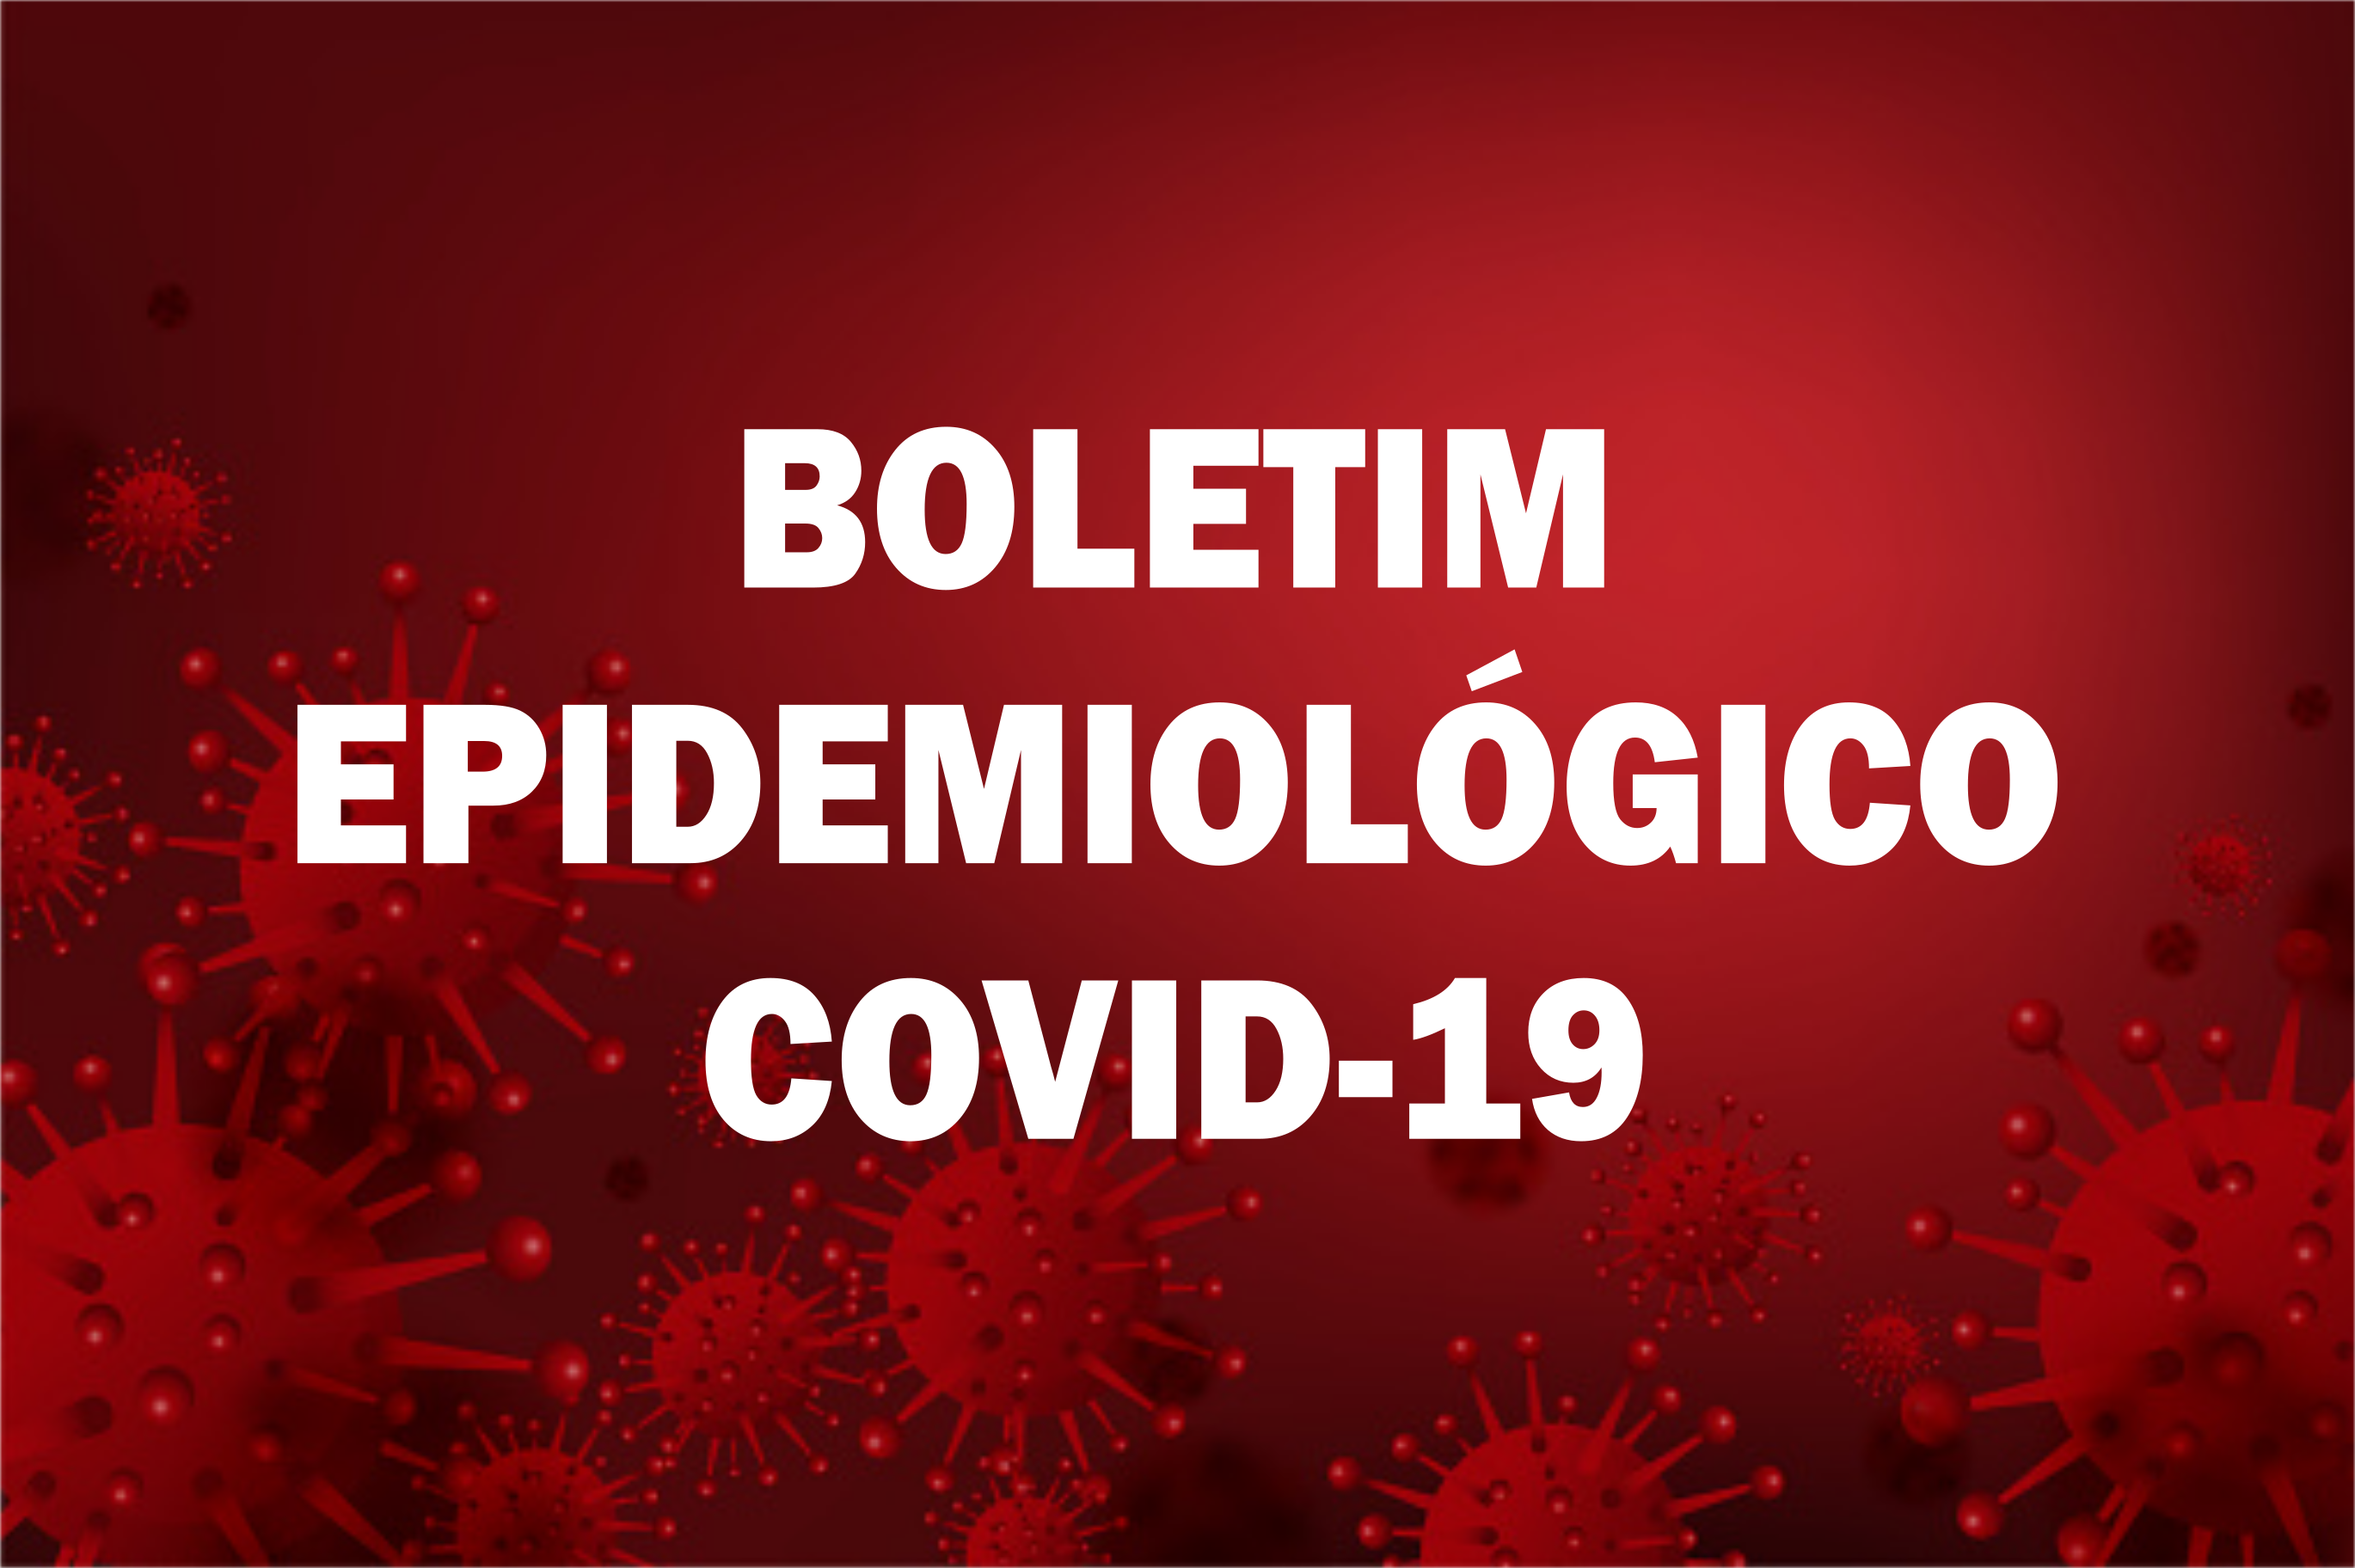 You are currently viewing BOLETIM EPIDEMIOLÓGICO Nº 131 (COVID-19)